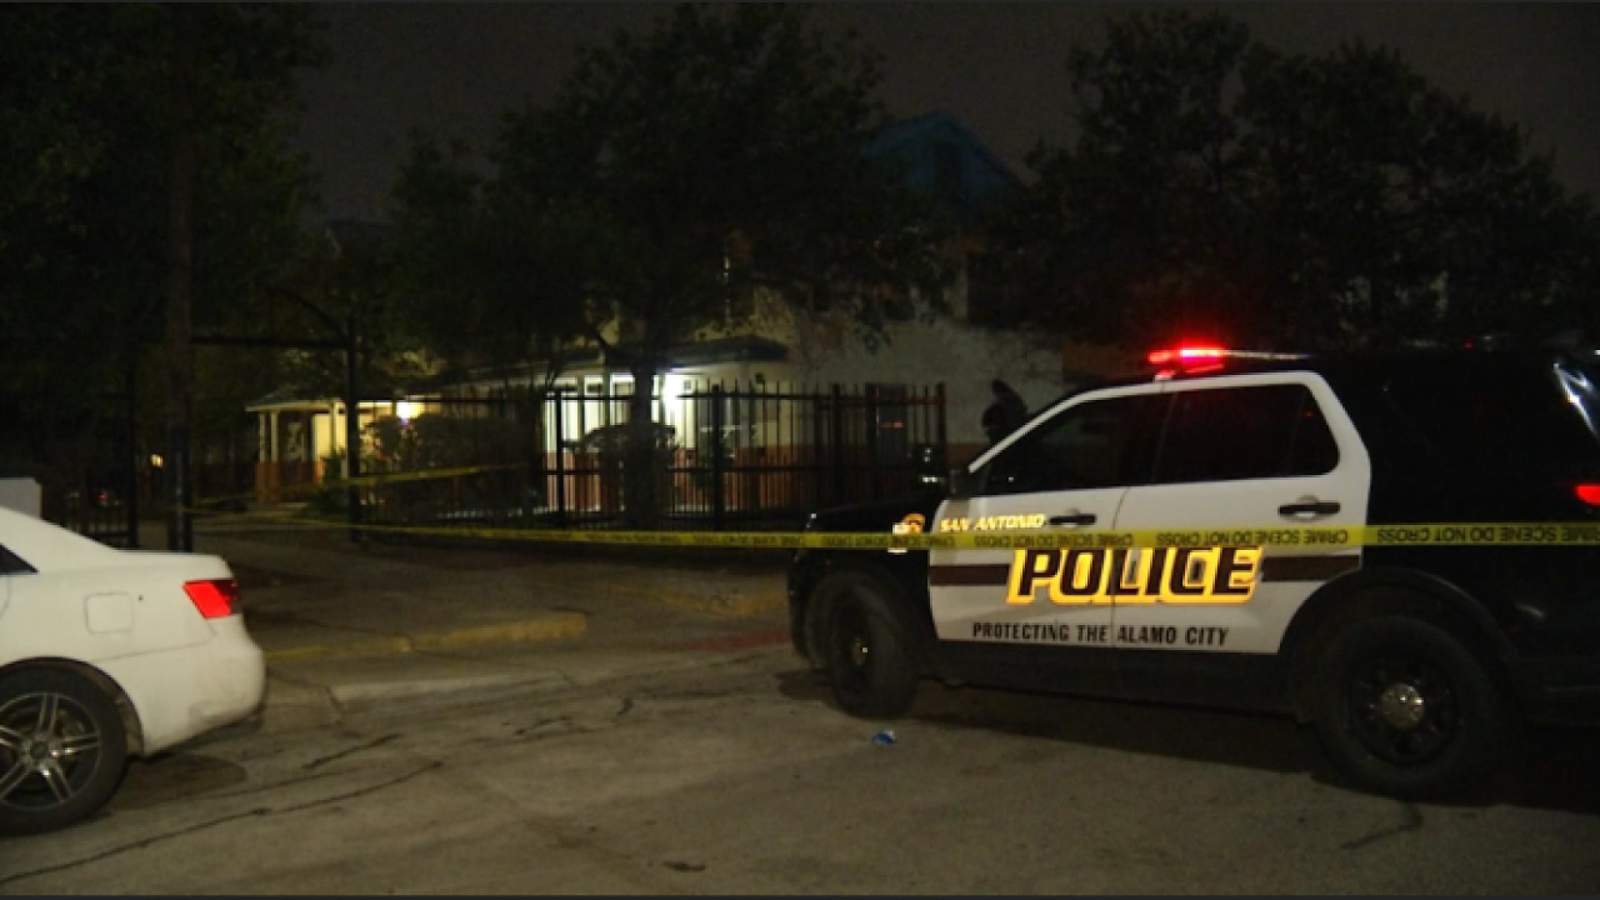 Man shot in hand during robbery at West Side apartment, police say